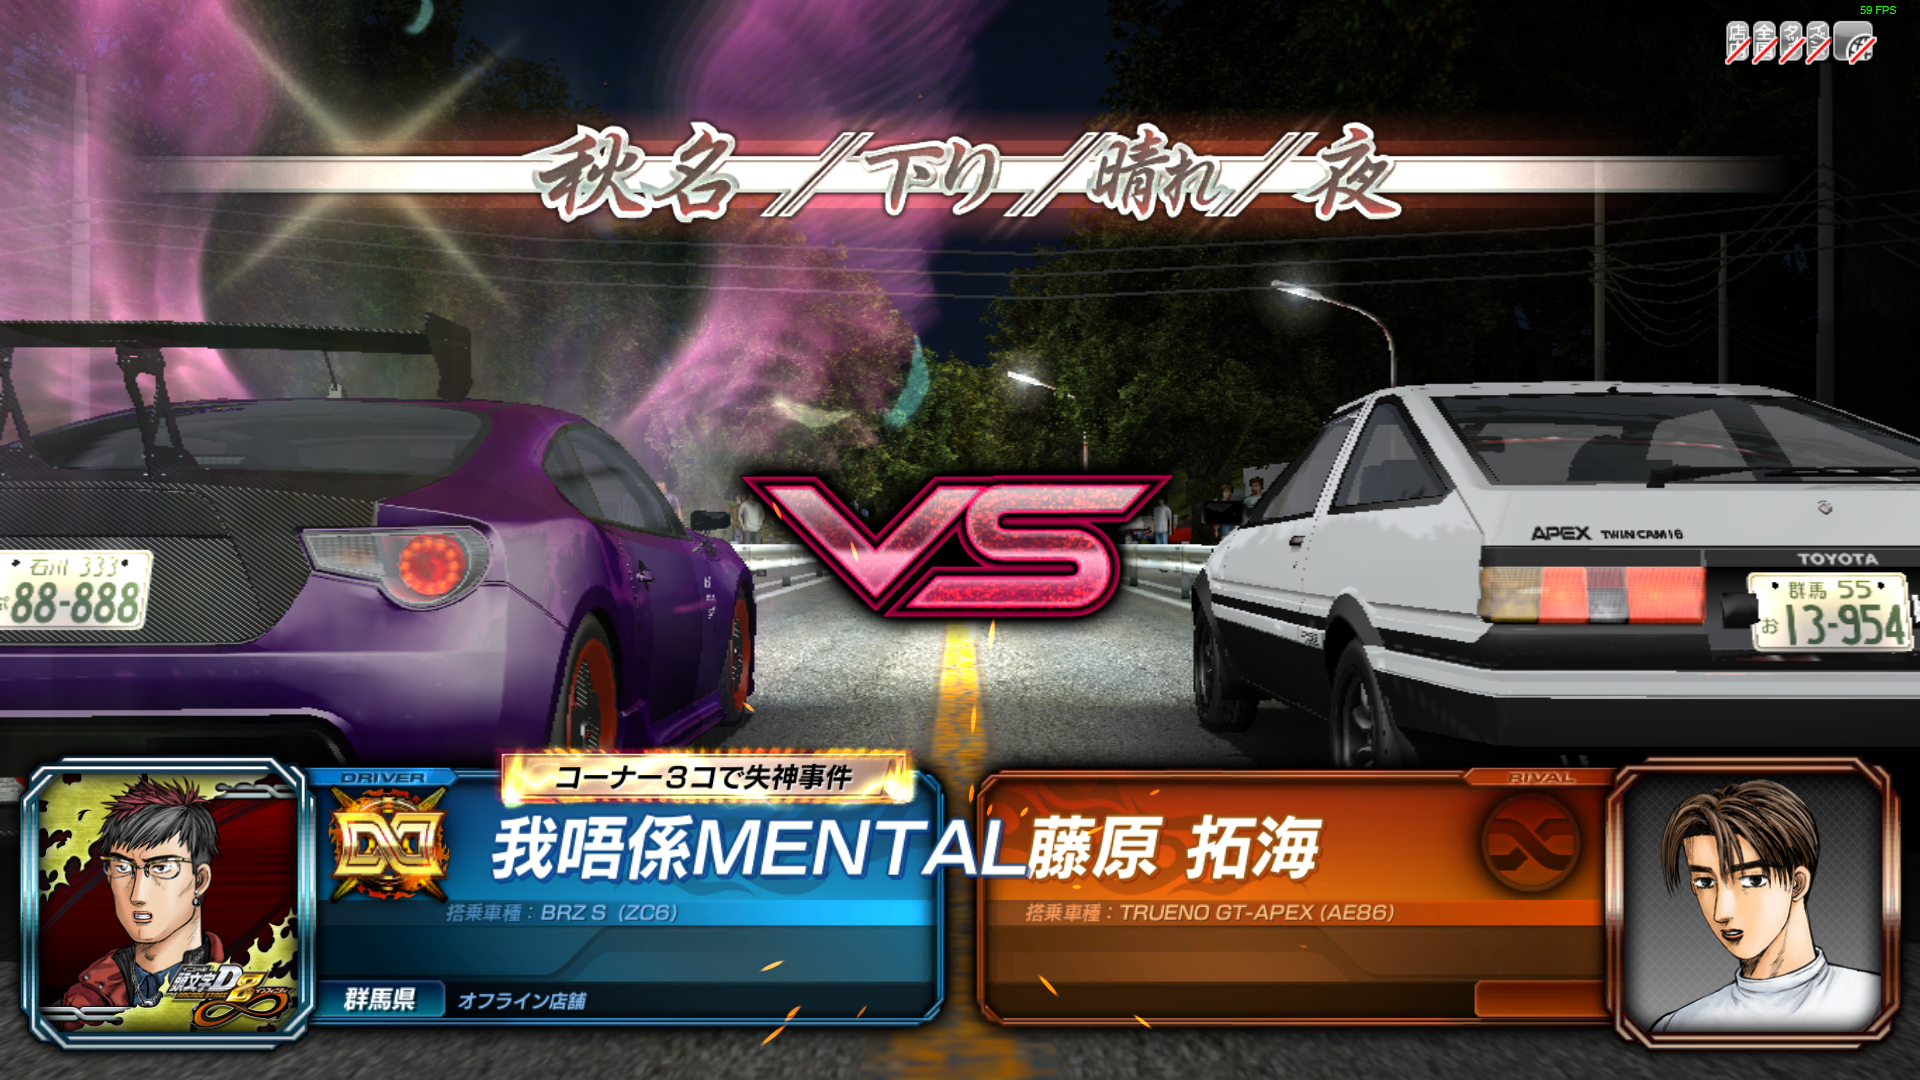 Deprecated Initial D Arcade Stage Launcher Card Editor Teknoparrot I M Not Mental